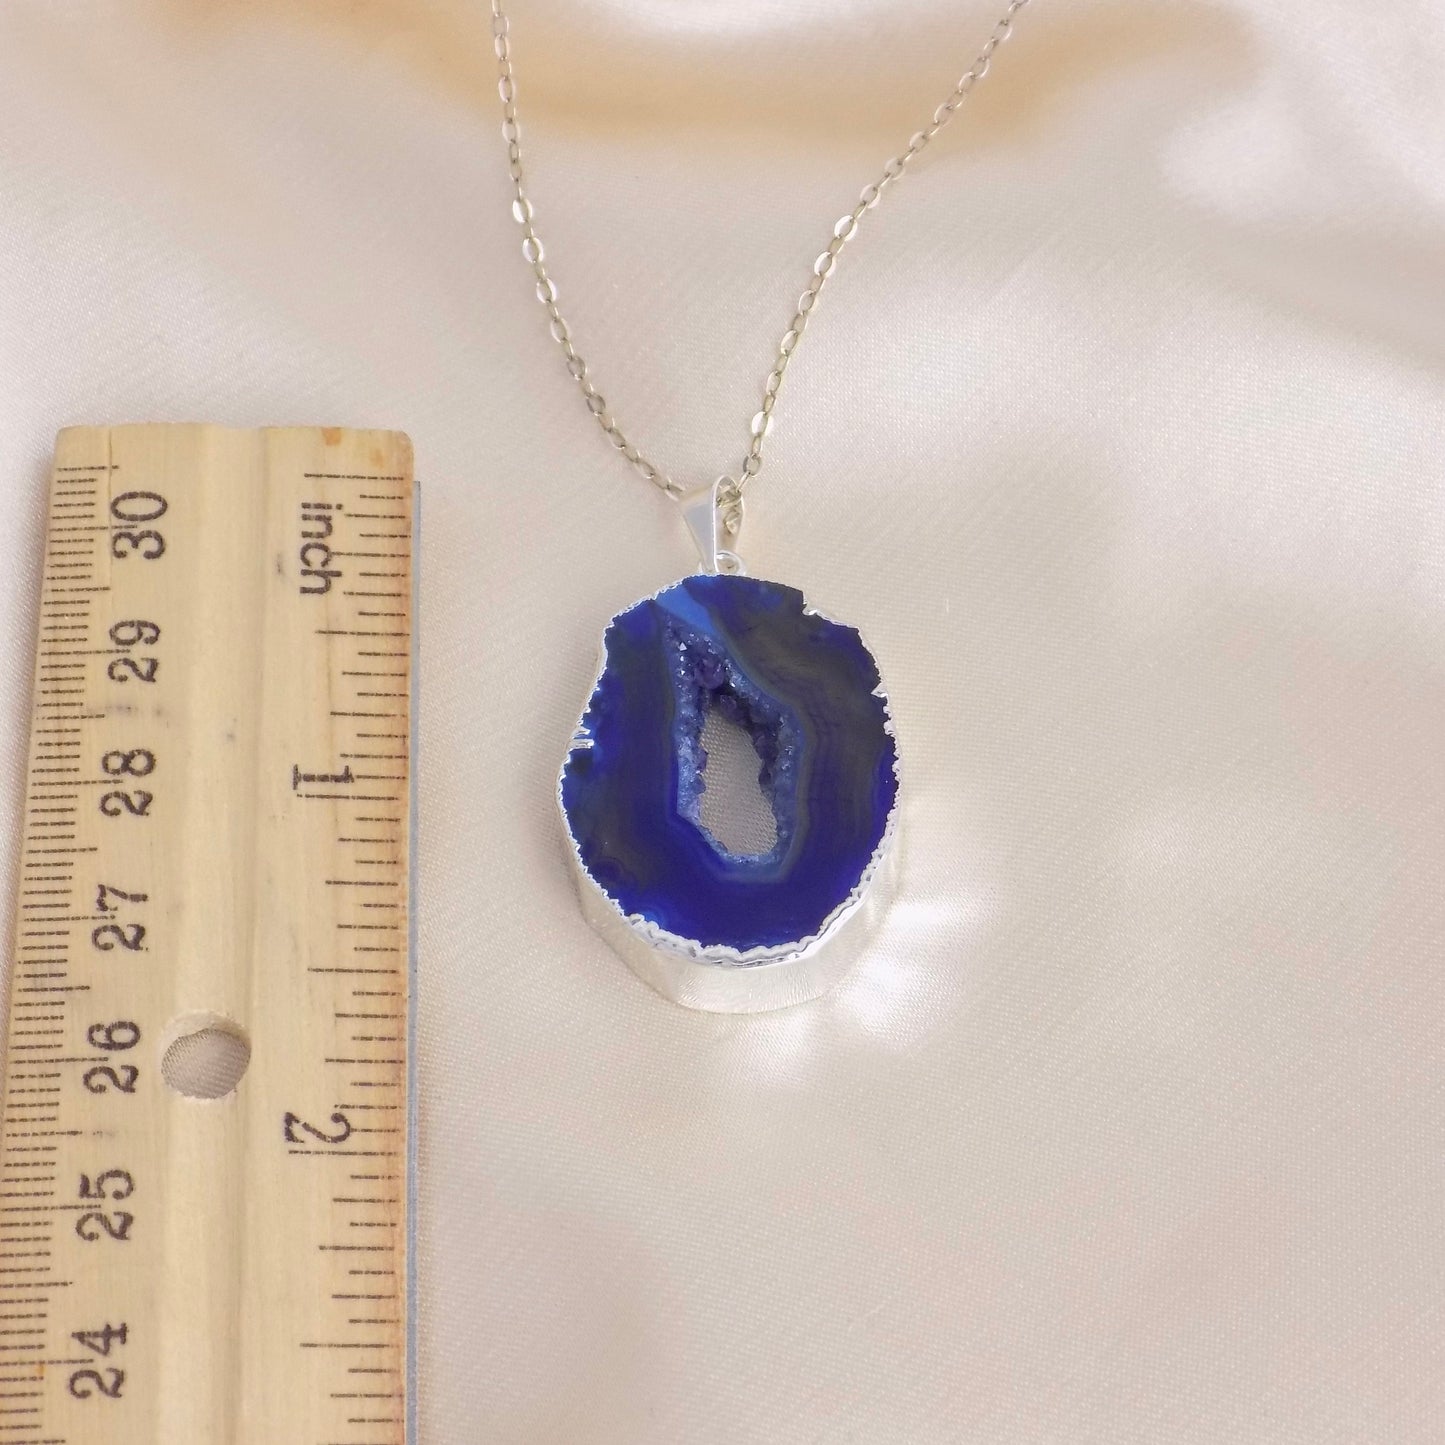 Blue Geode Necklace Silver, Boho Statement Sliced Geode Pendant for Layering, Christmas Gifts For Best Friend, G14-296